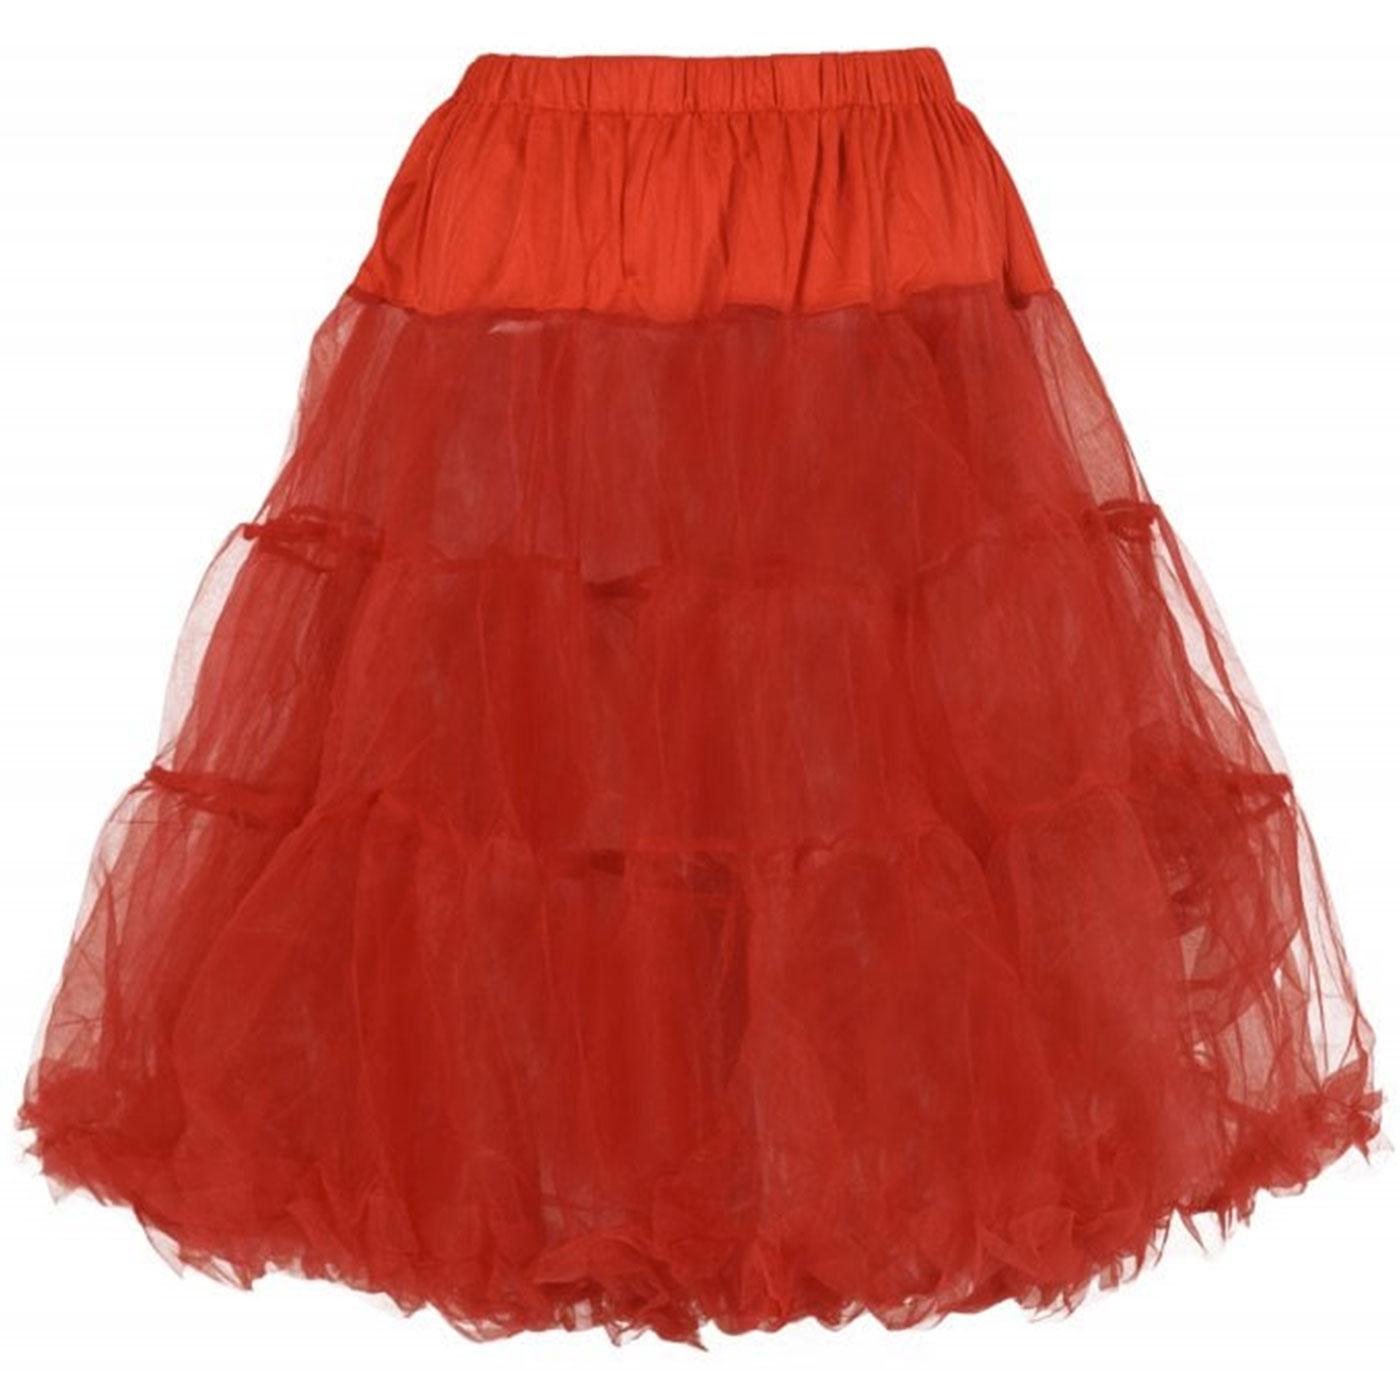 Maddy COLLECTIF Retro Vintage Petticoat in Red